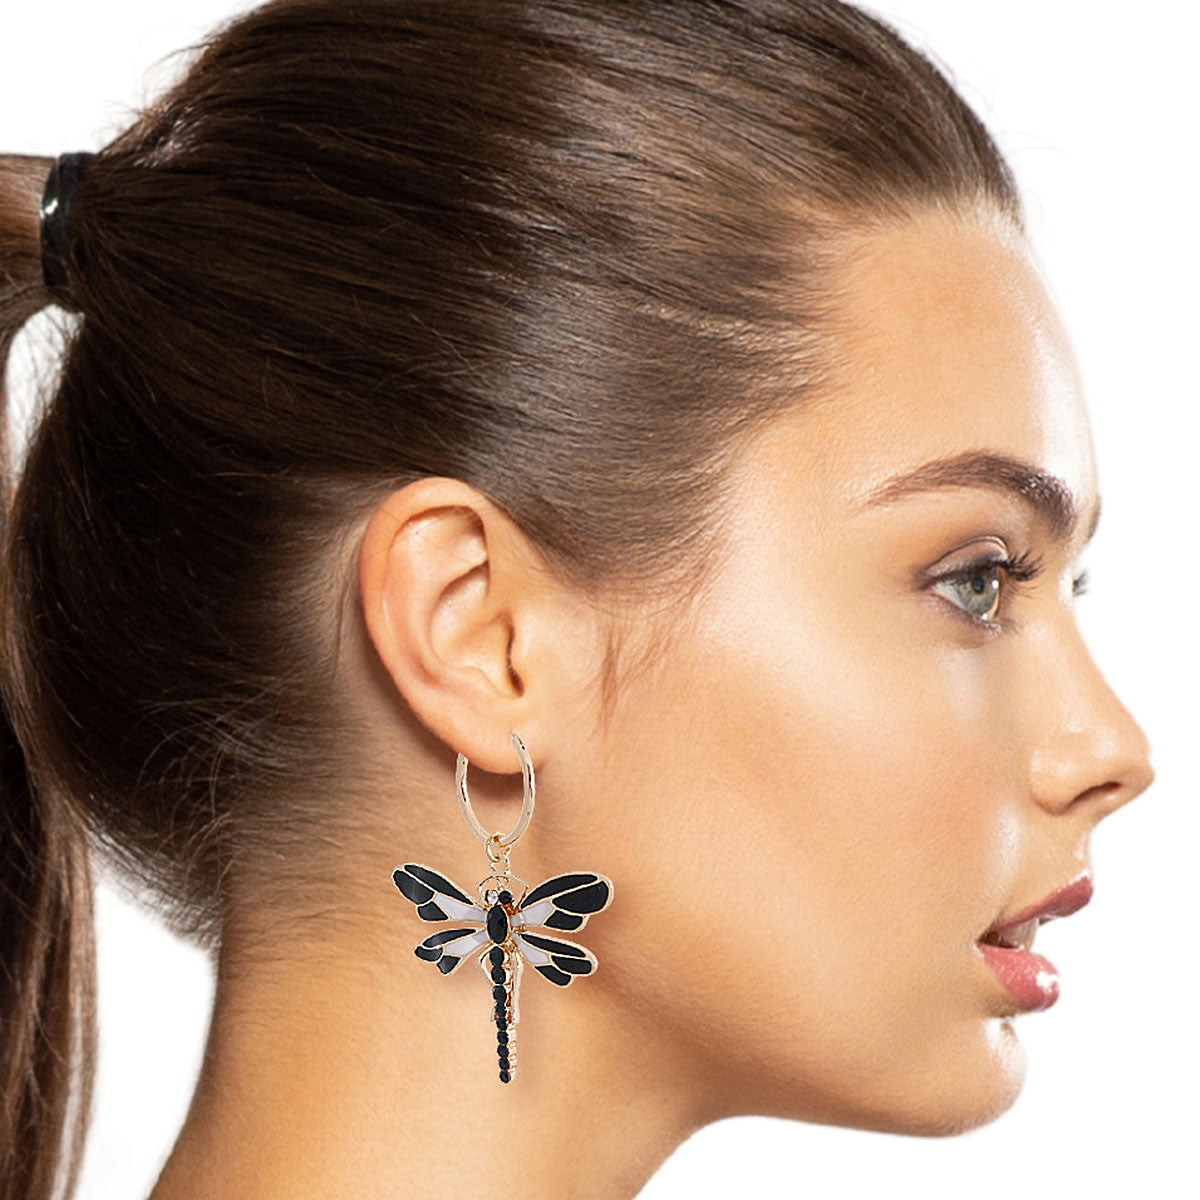 Black and White Dragon Fly Baby Hoops